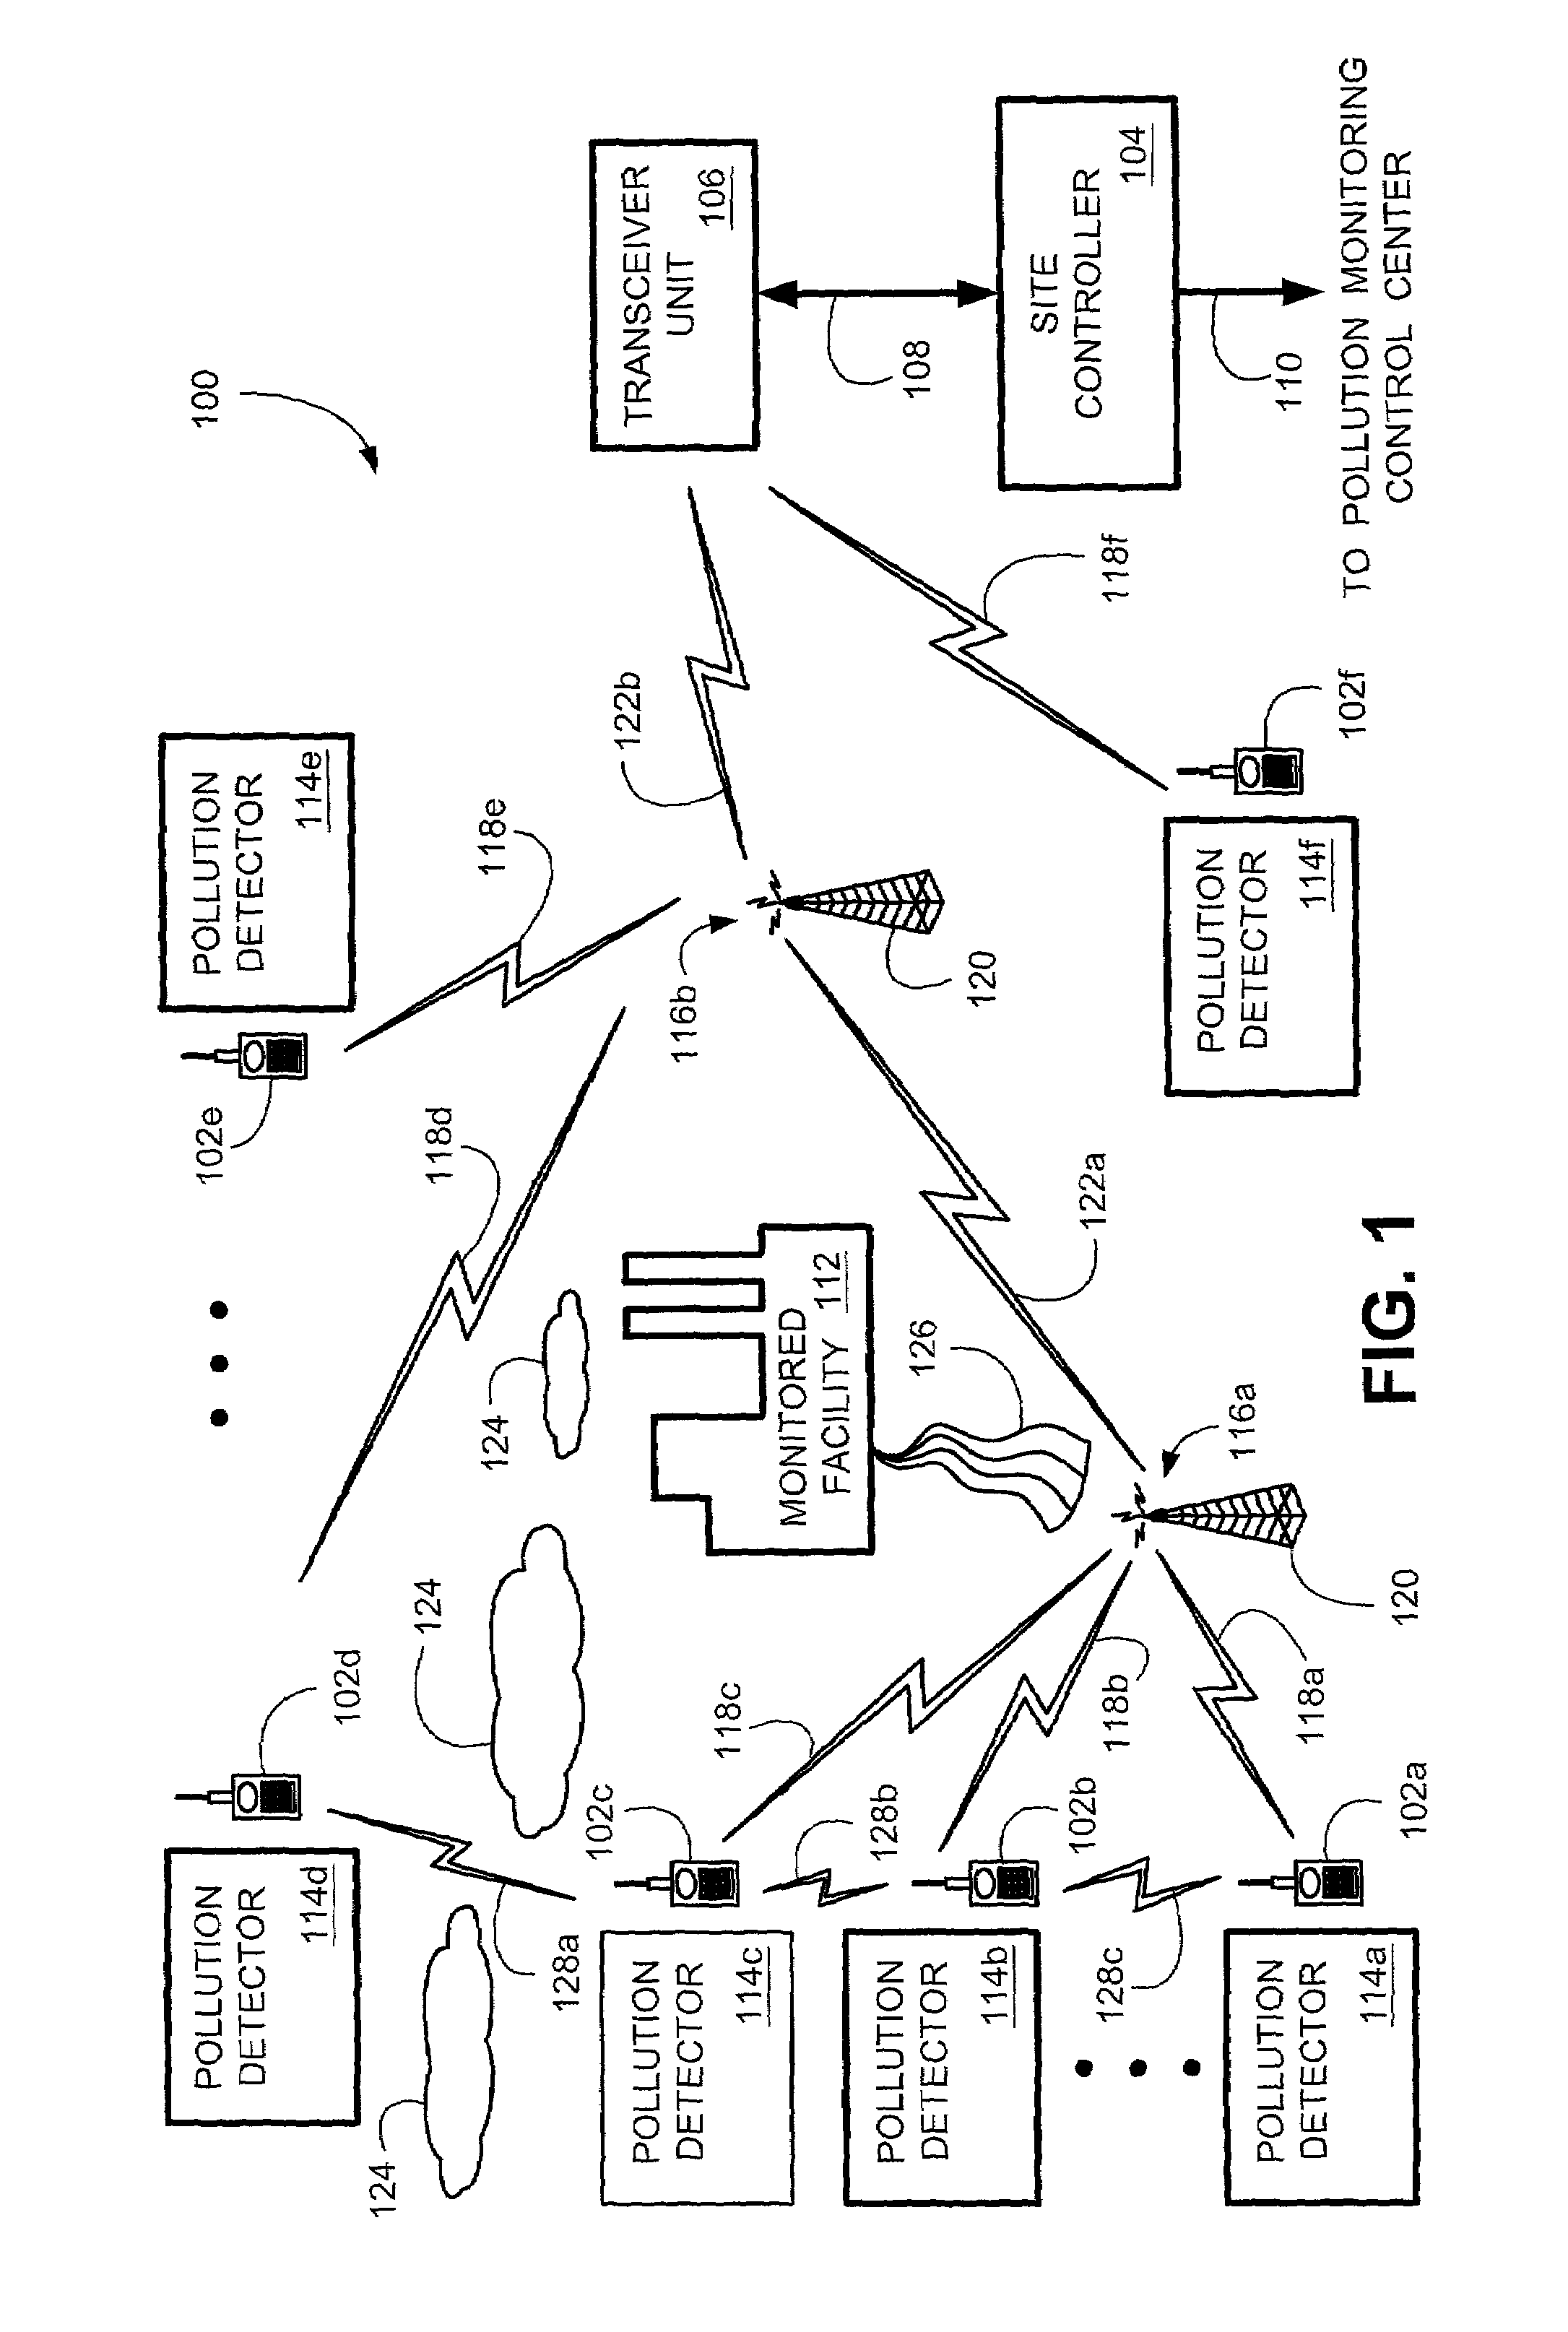 System and method for transmitting pollution information over an integrated wireless network